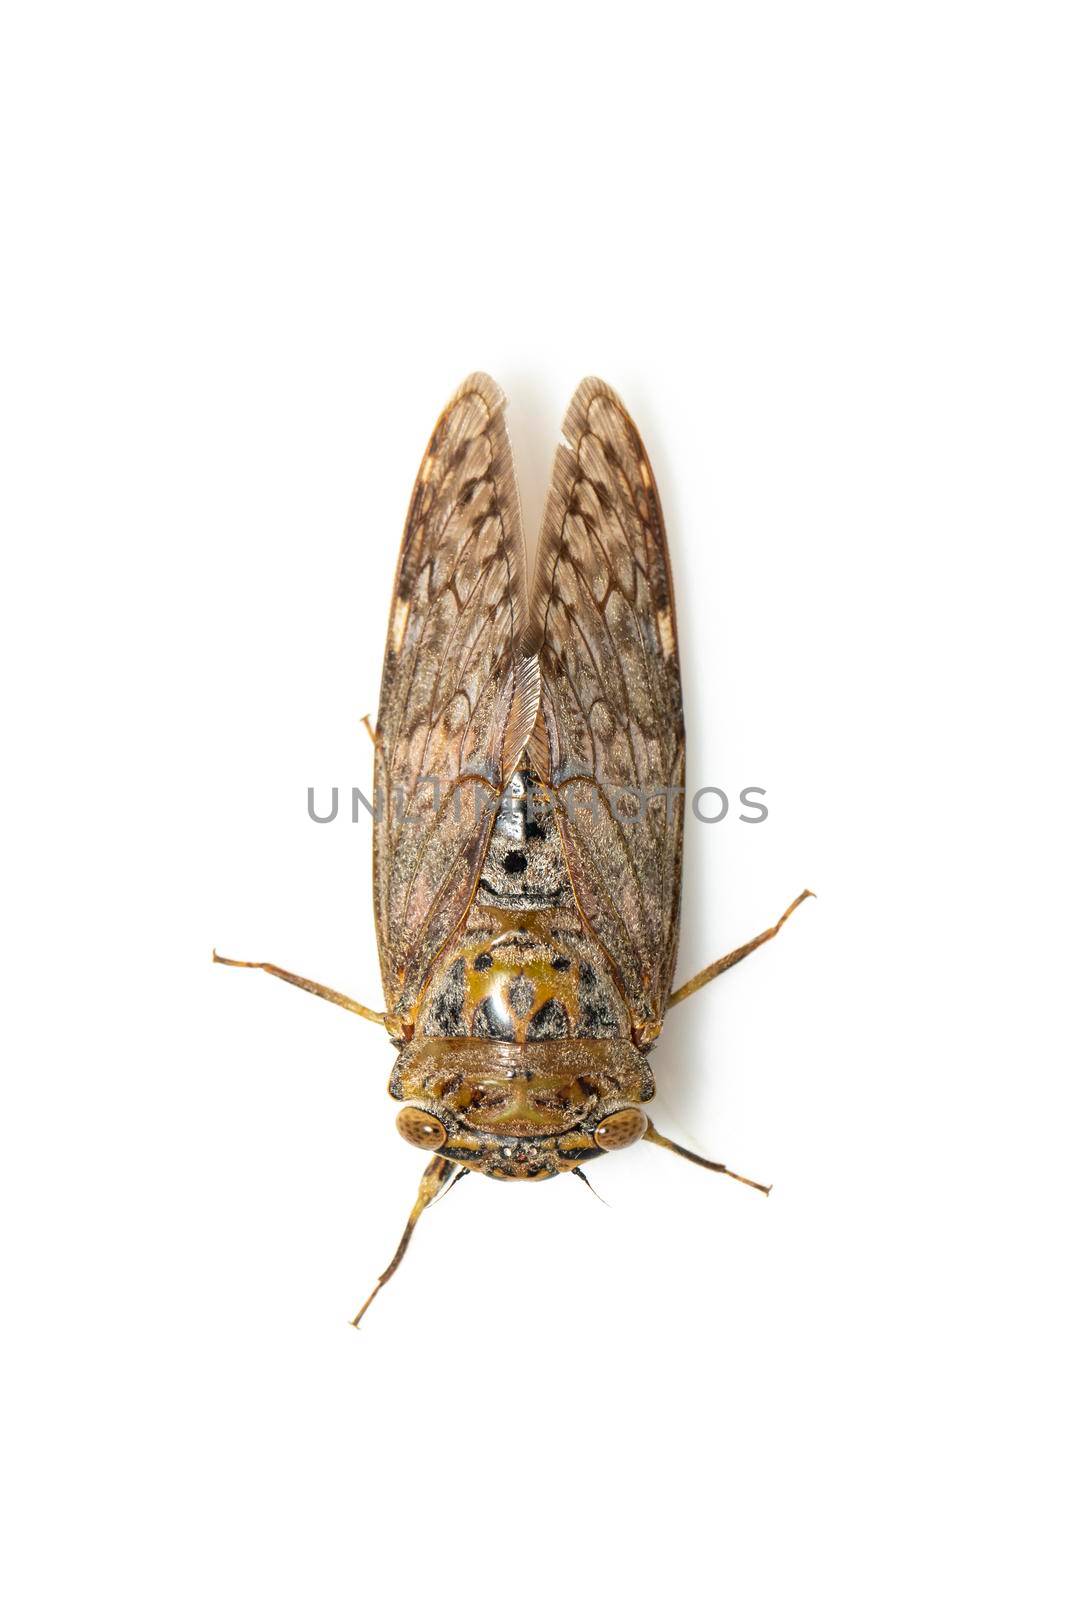 Image of large brown cicada insect isolated on white background. Insects. by yod67